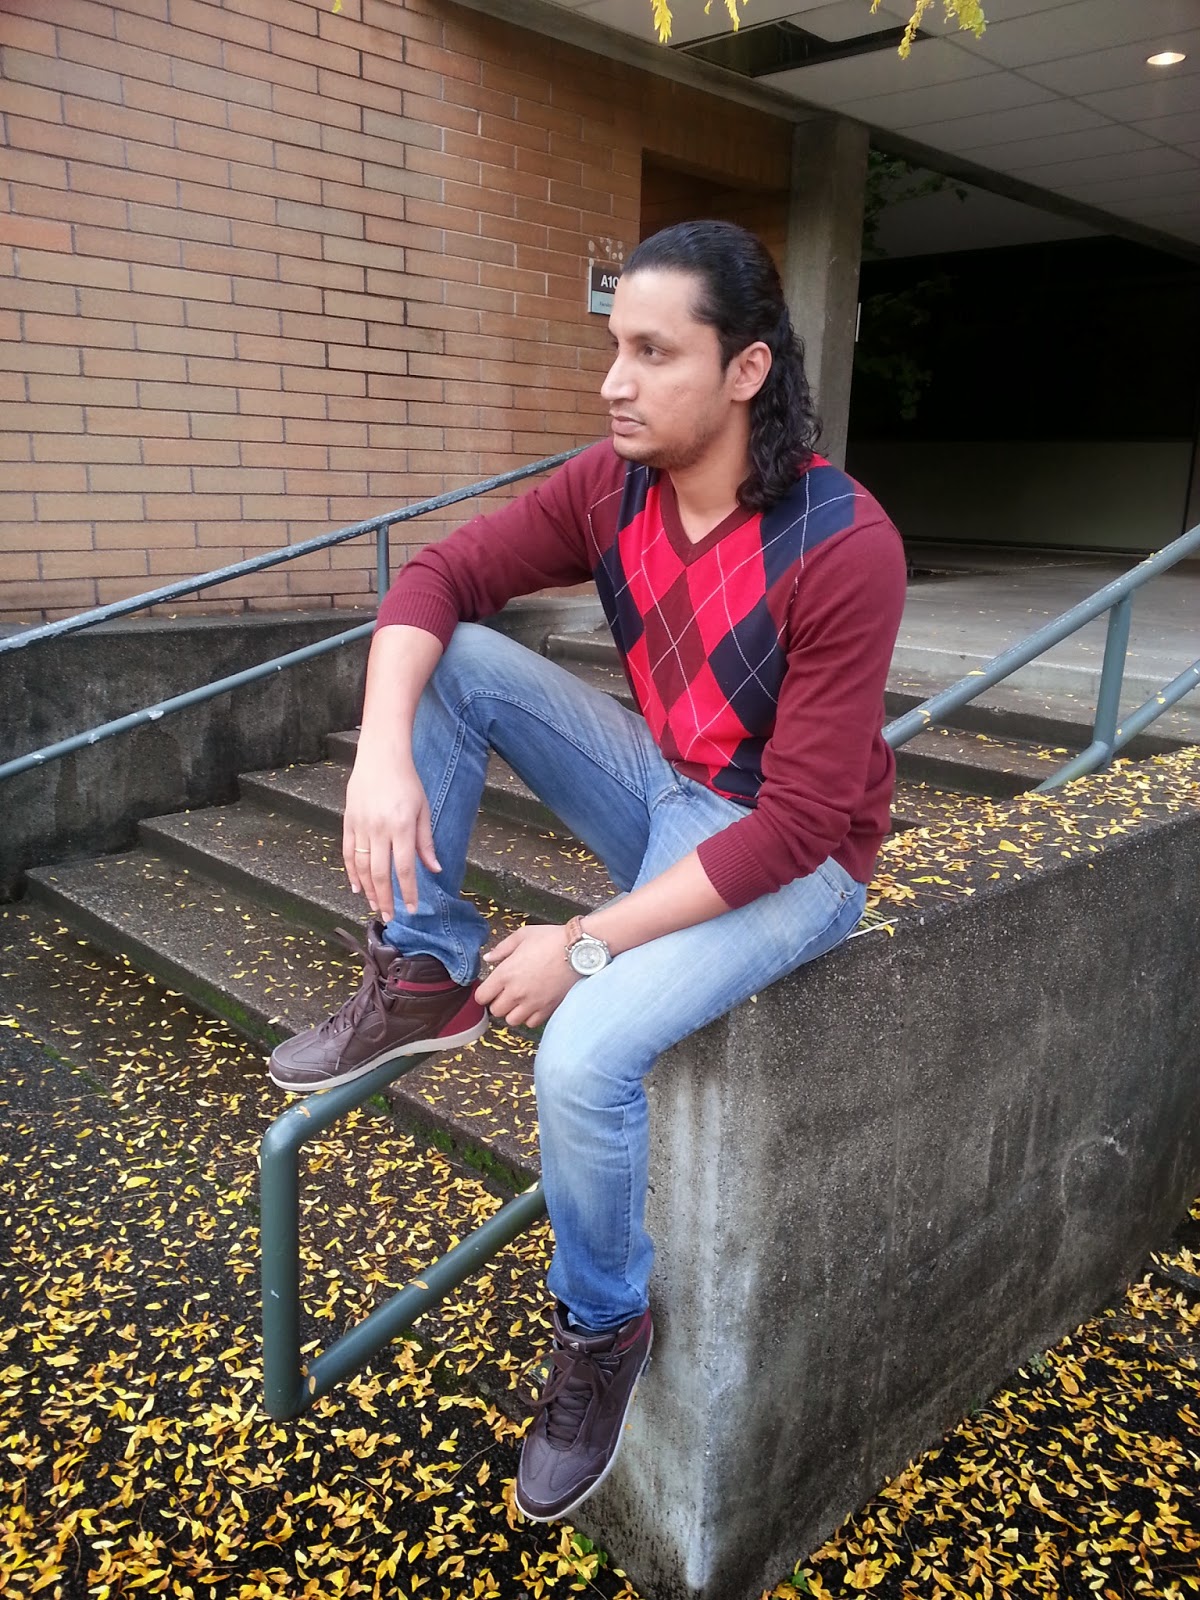 Guy wearing argyle sweater and brown boots, Indian Male fashion blogger, Indian couple fashion blogger, Argyle Sweater for men, Male fashion blogger